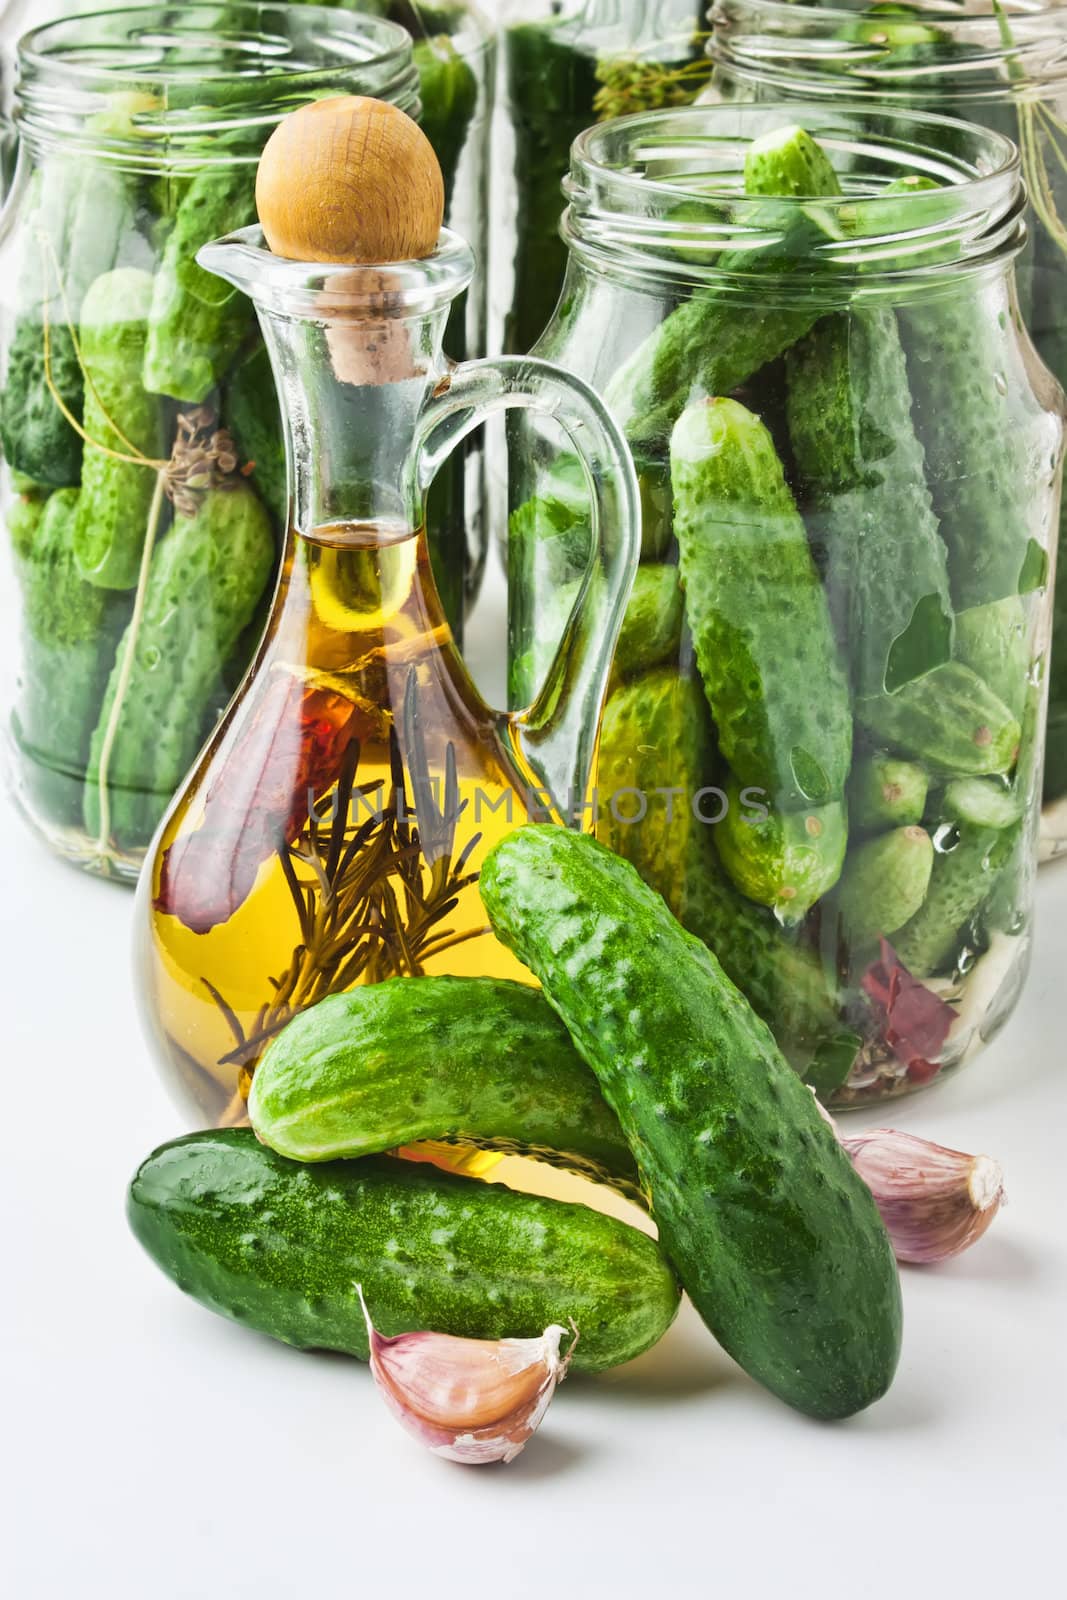 harvesting and canning cucumbers by oleg_zhukov